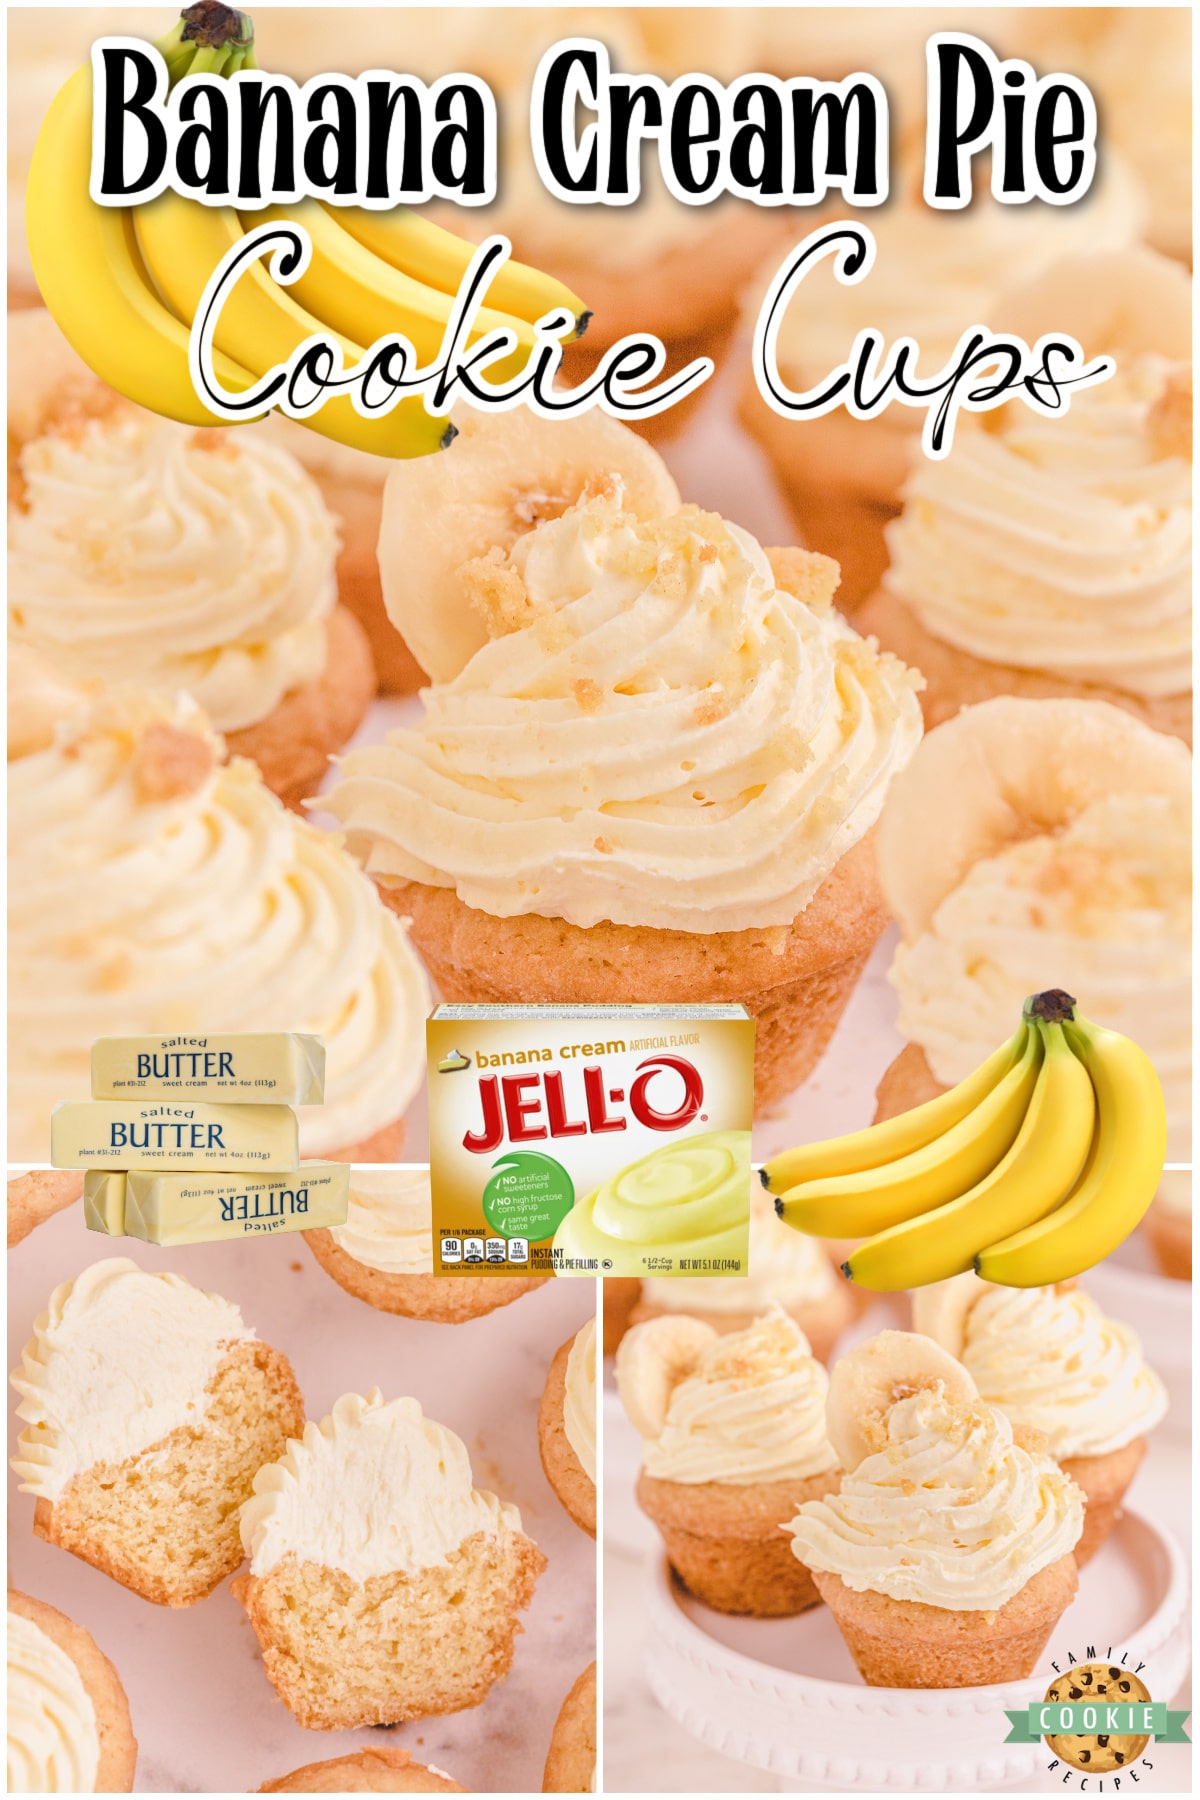 Banana Cream Pie Cookies are everything you love about Banana Cream Pie, in bite-sized cookie form! Easy family favorite banana cookie recipe!